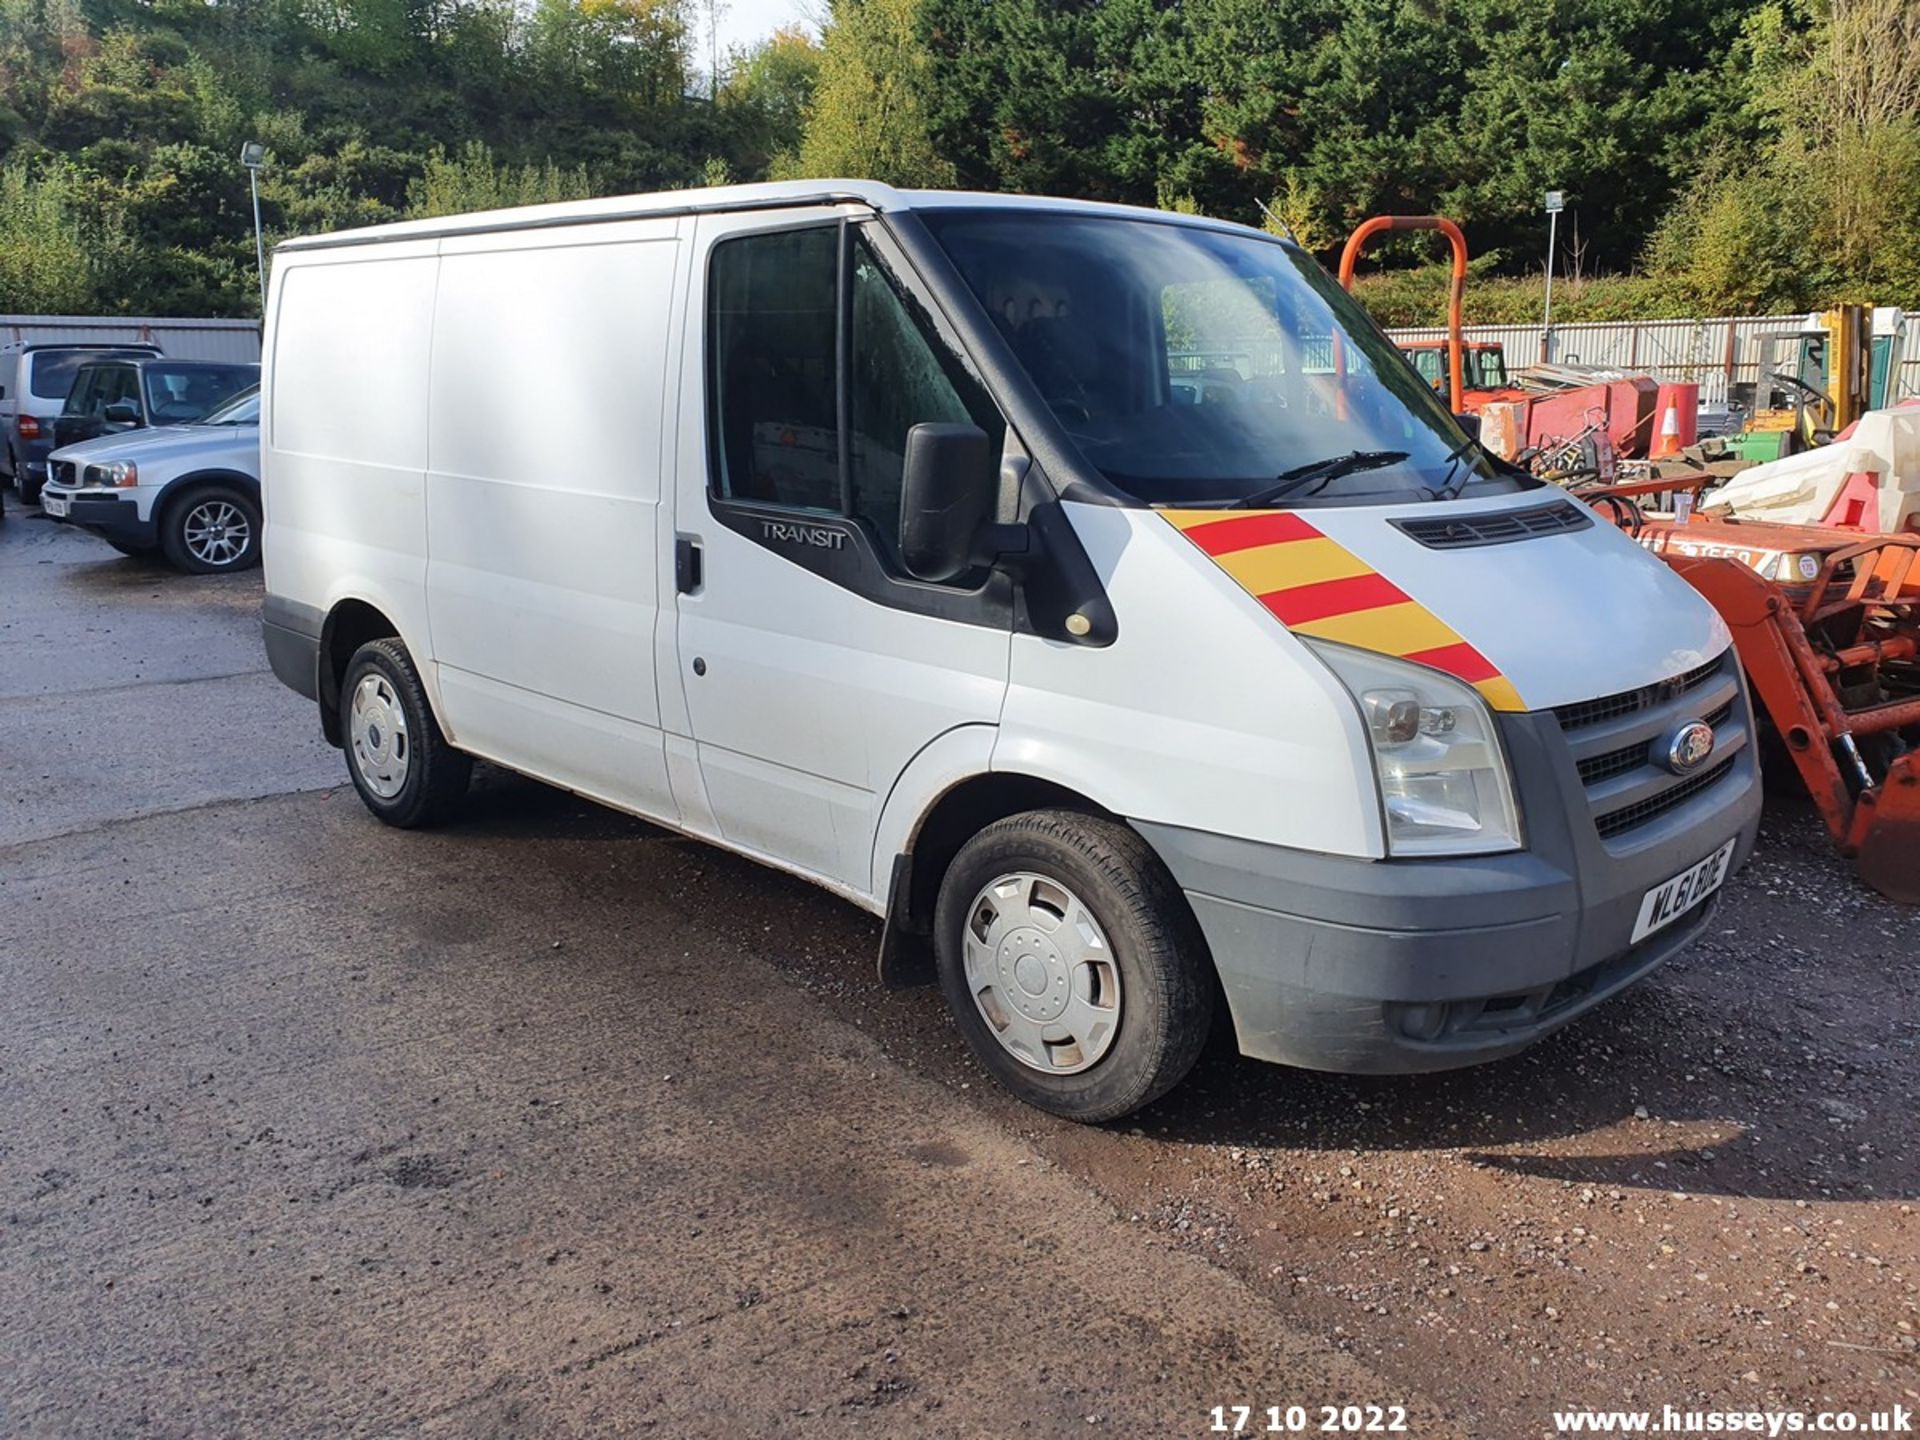 11/61 FORD TRANSIT 115 T280S FWD - 2198cc 5dr Van (White) - Image 23 of 23